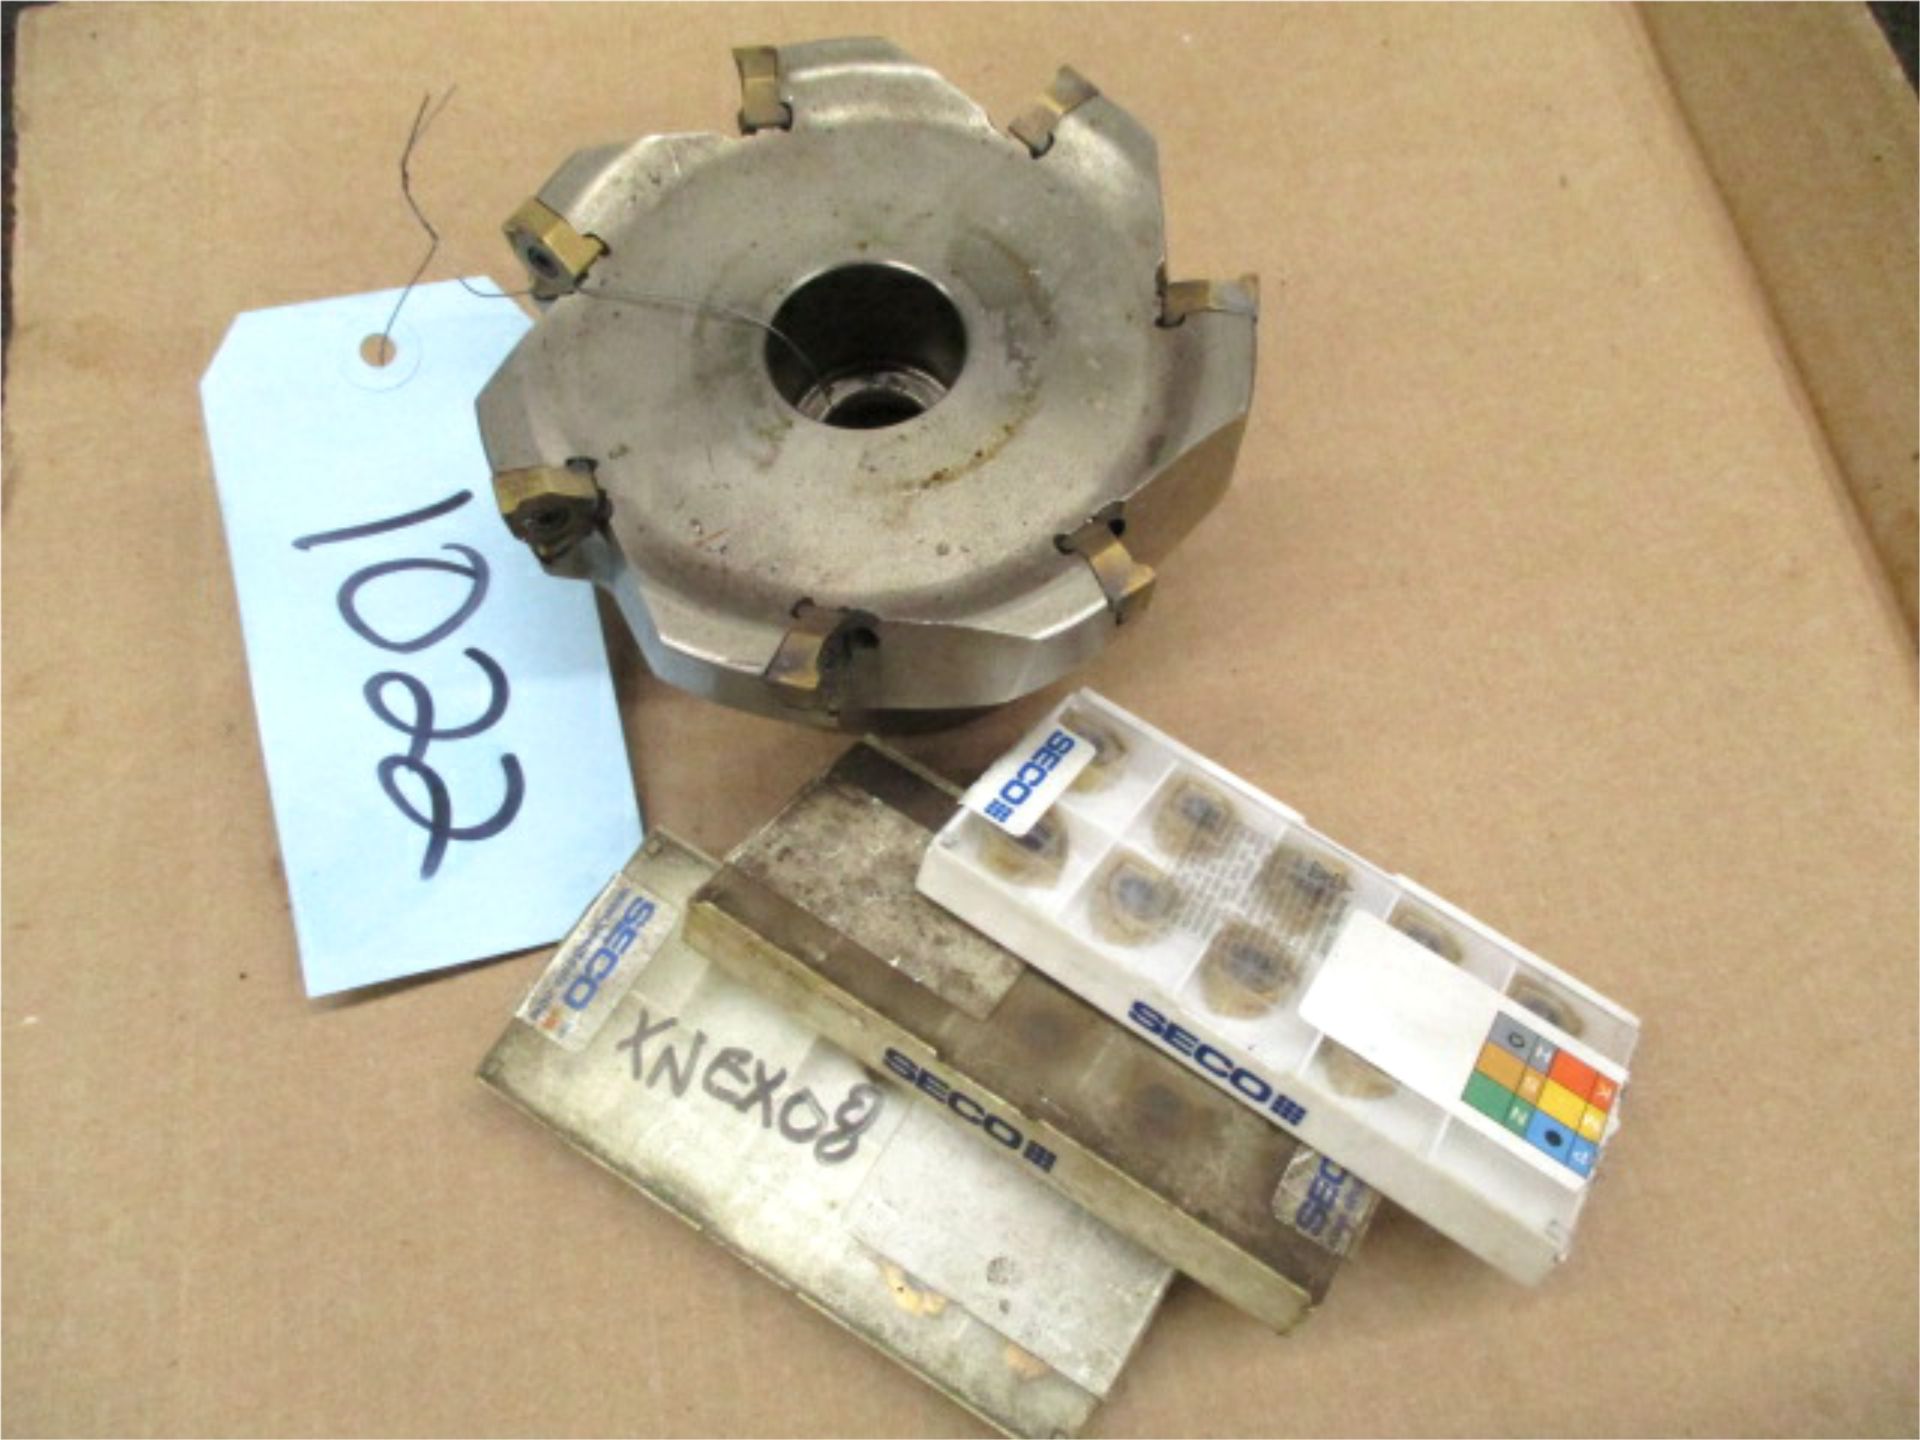 CNC Tooling, 1 pcs. with 3 opened box of inserts